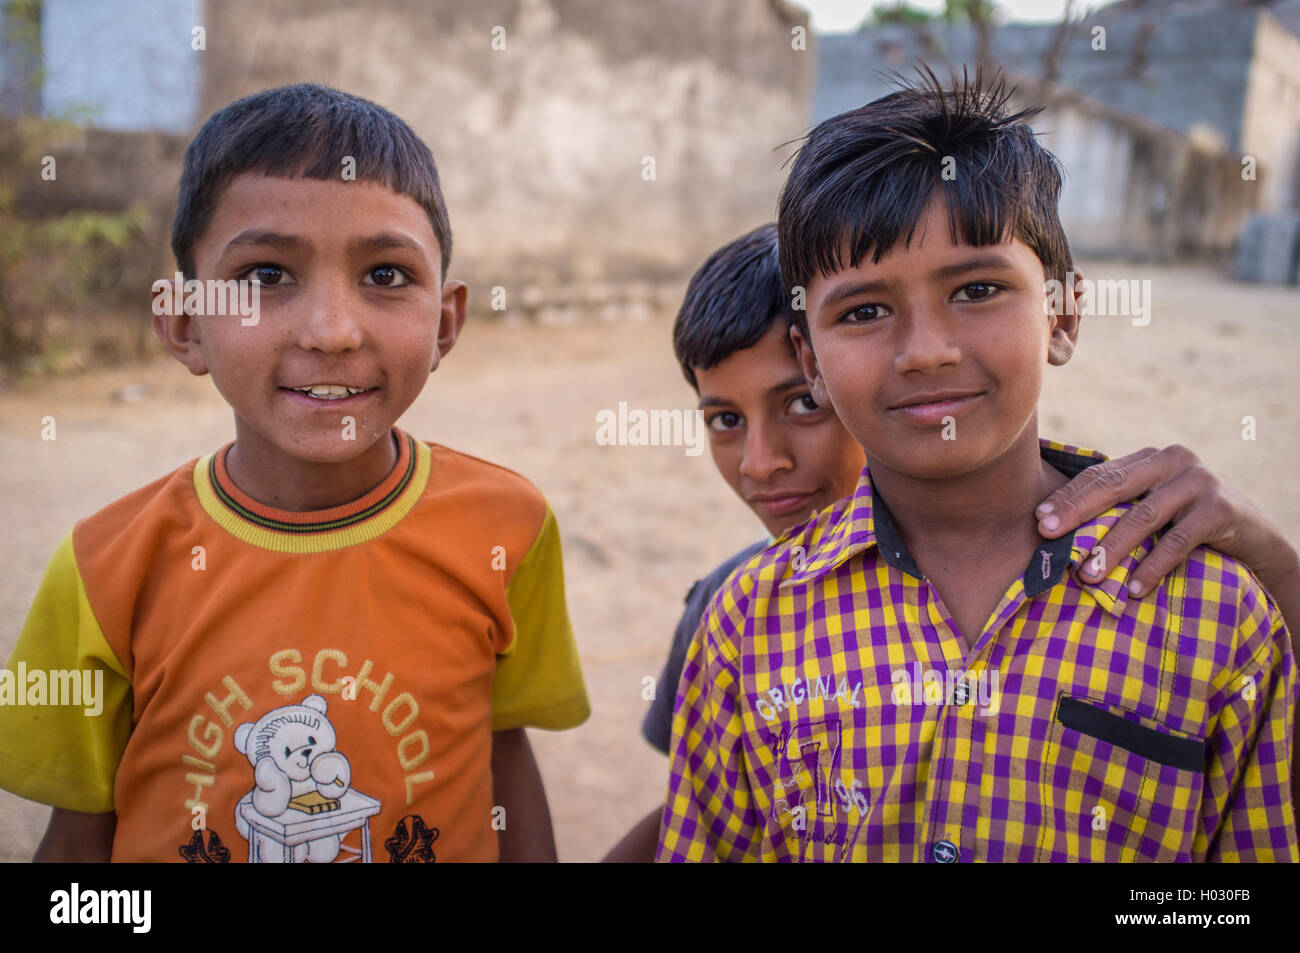 GODWAR REGION, INDIA - 12 FEBRUARY 2015: Three boys from Rabari tribe. Loss of tradition gains pace from every new generation. R Stock Photo